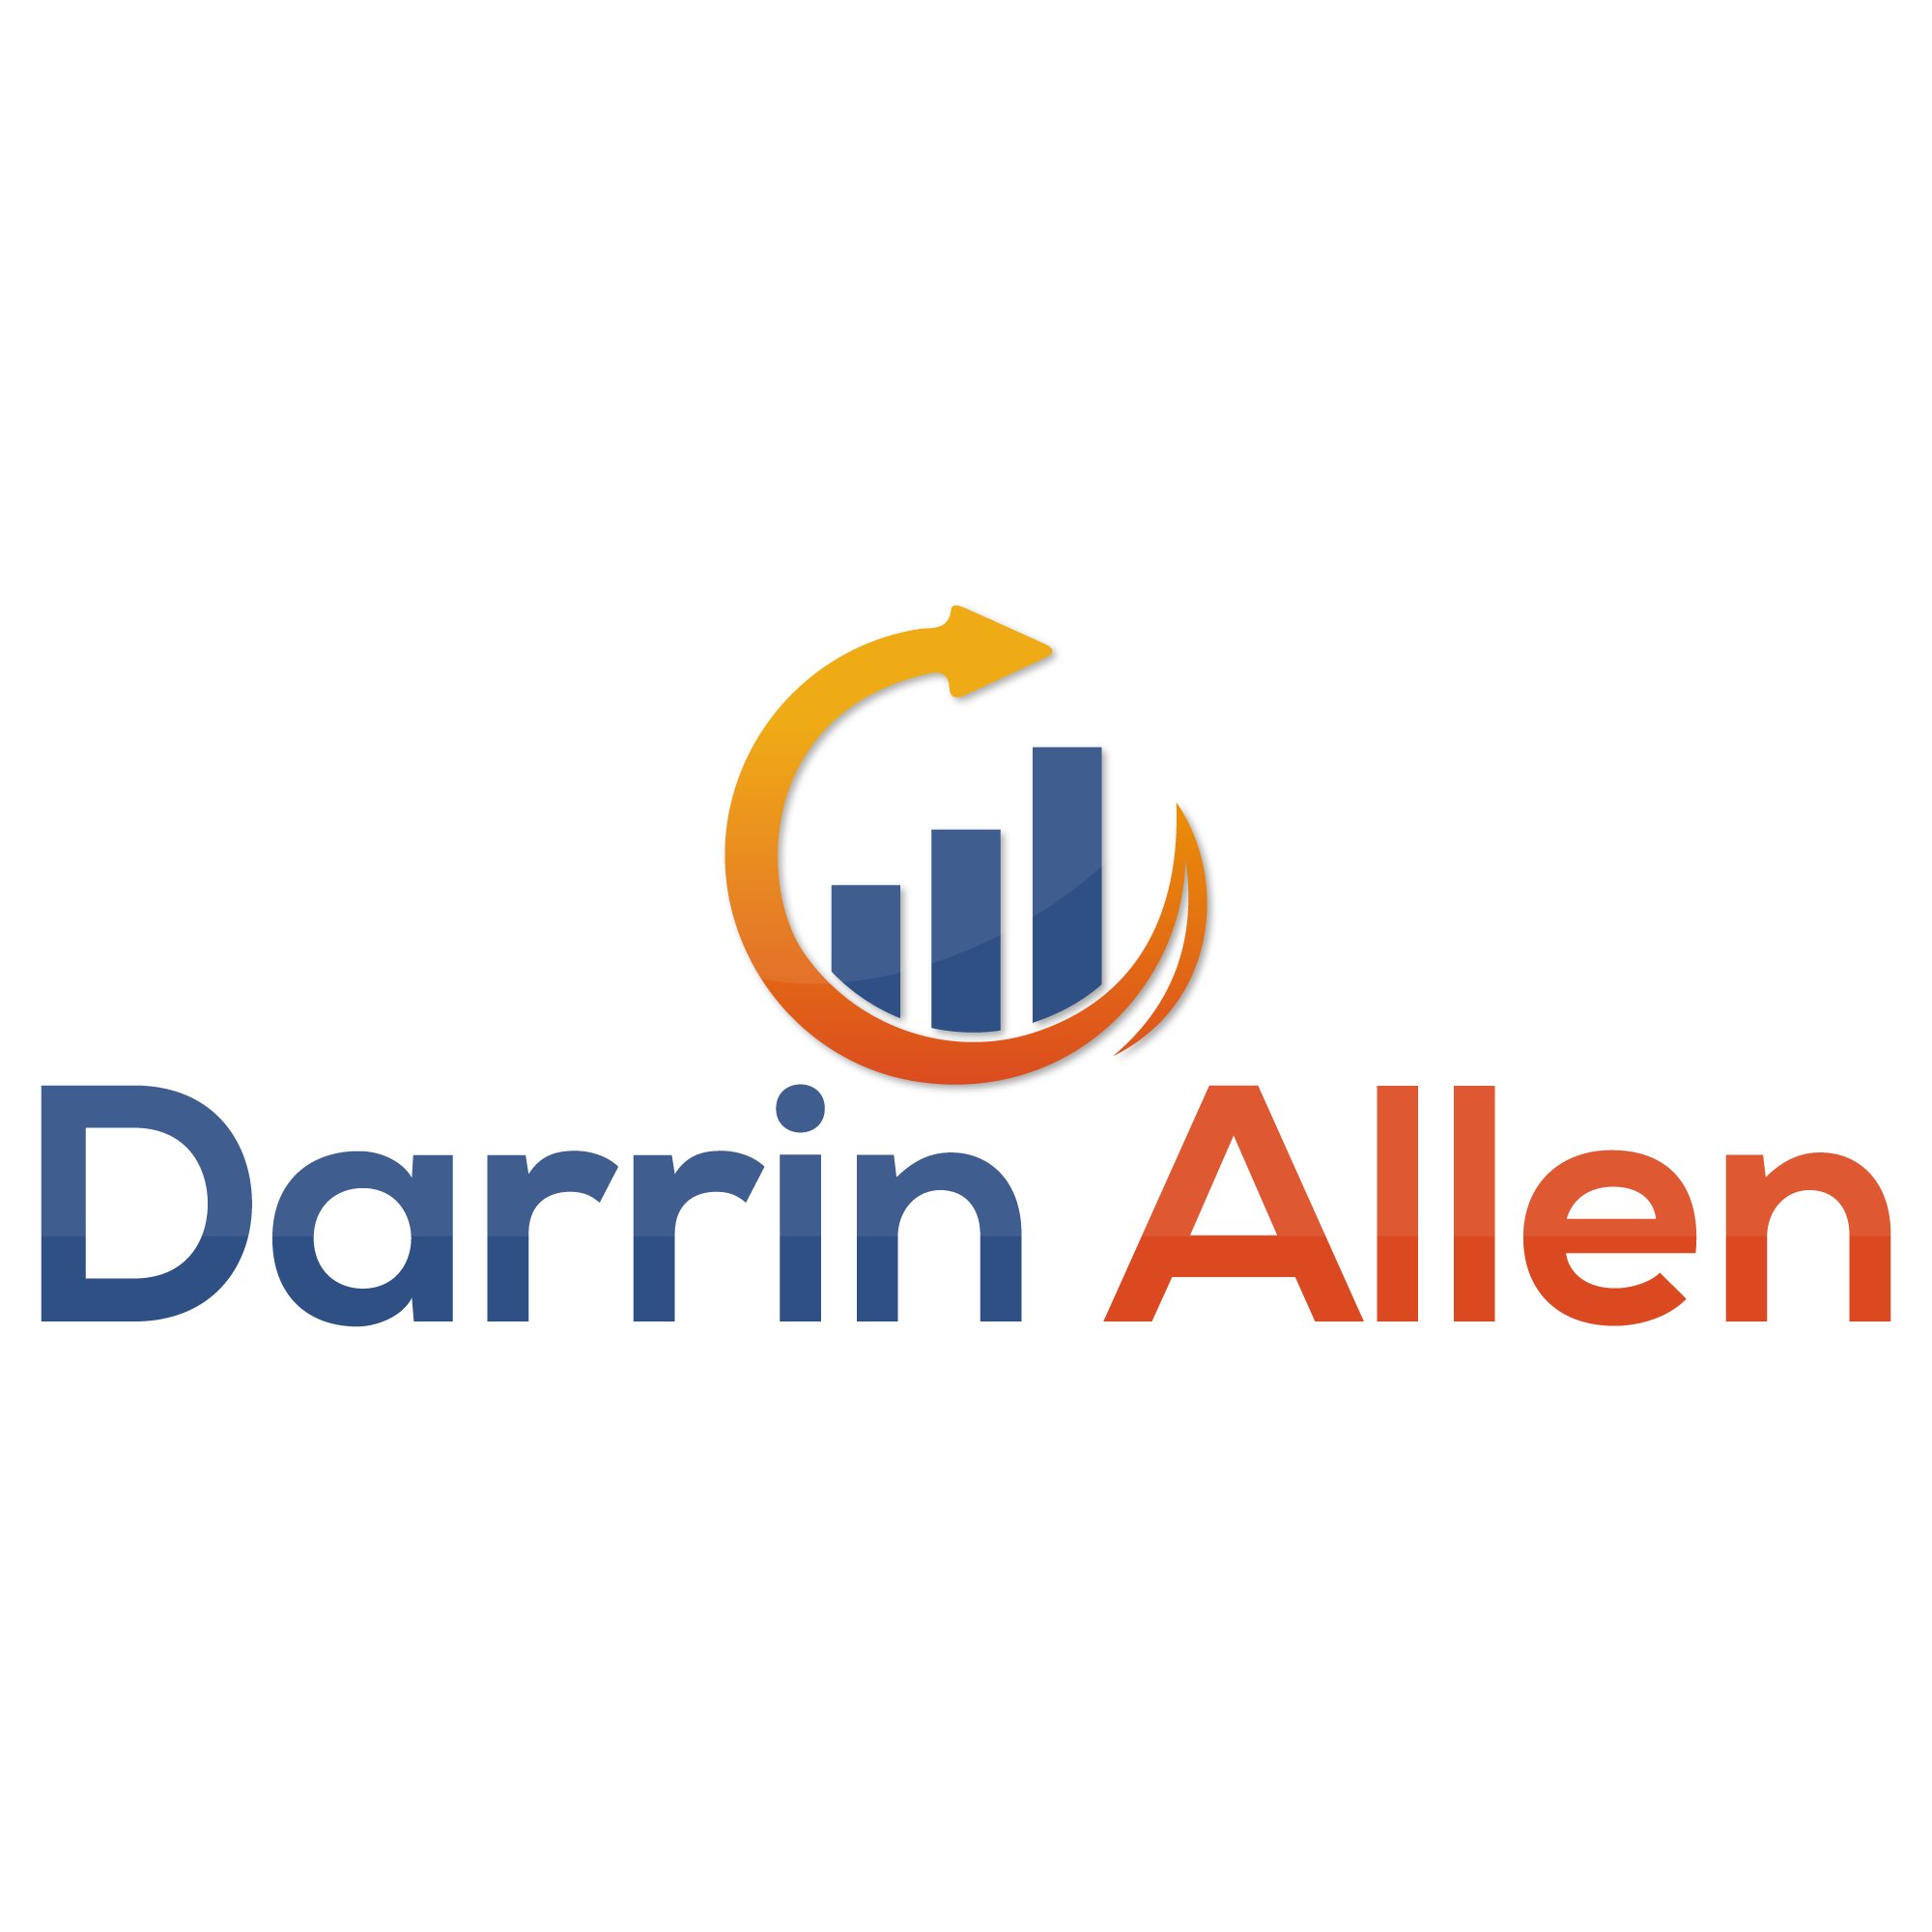 Im Darrin

I am an SEO Expert for 10 years.  Achieving amazing results for my customers and their businesses.